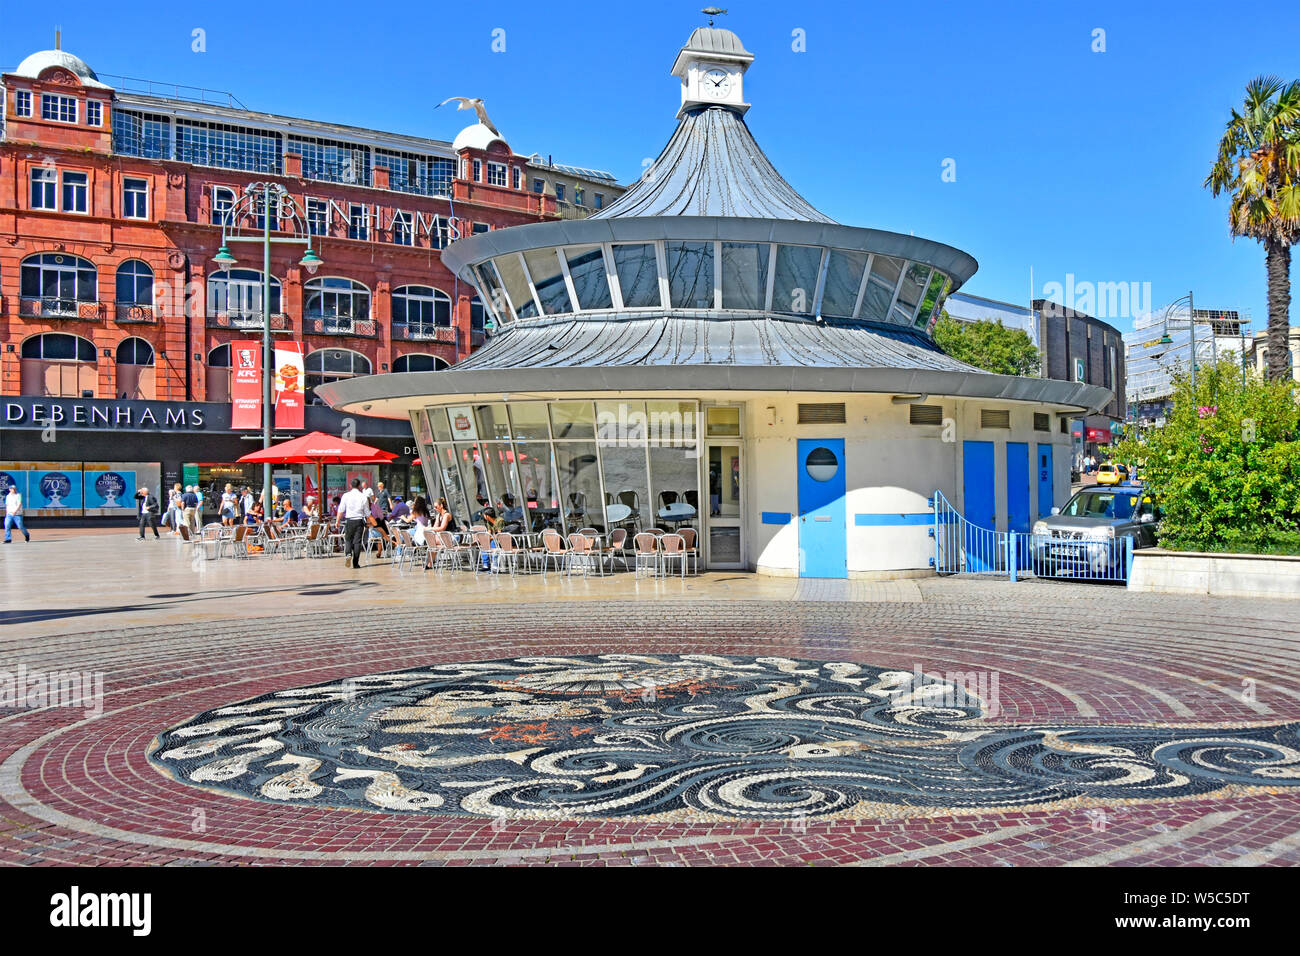 Bournemouth town centre The Square & pebble mosaic in pavement with Debenhams store & people sitting outdoors at Obscura street cafe Dorset England UK Stock Photo